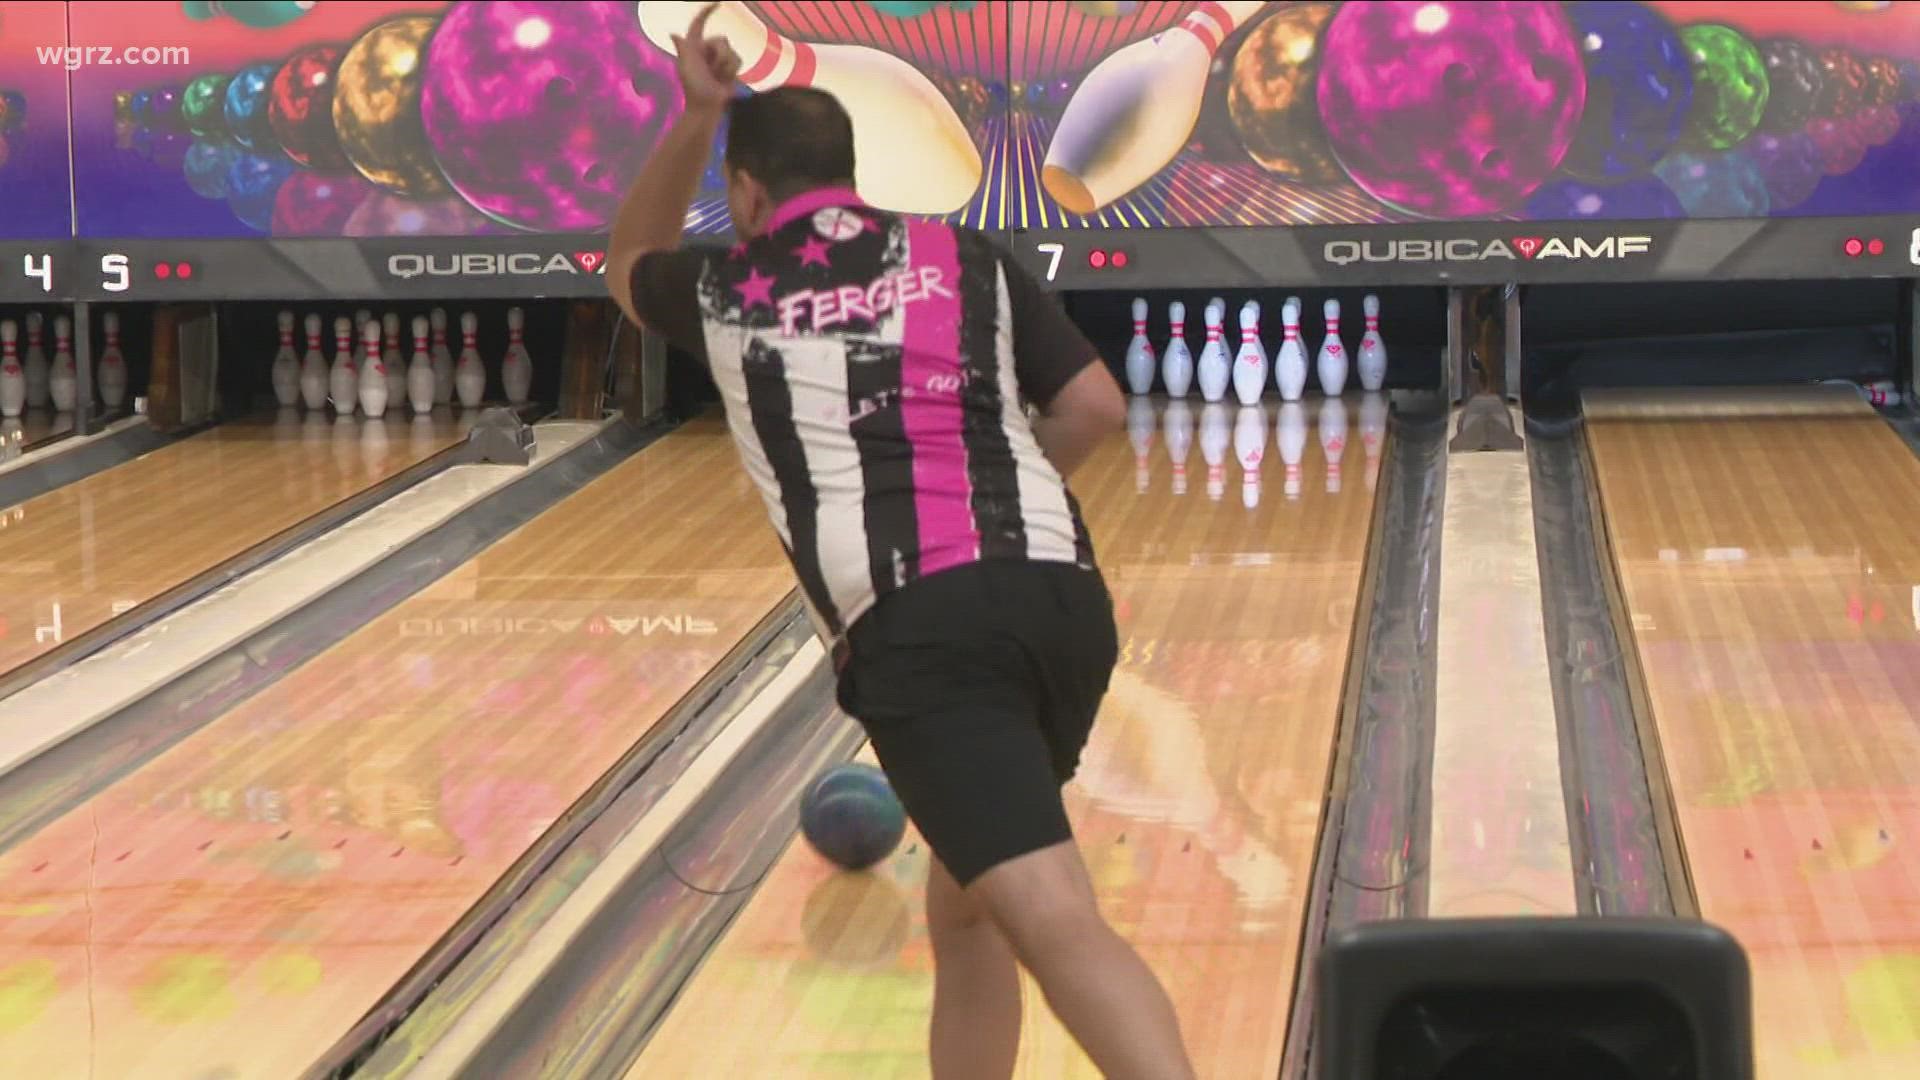 Bowling over cancer Fundraiser helps Ride For Roswell raise money wgrz